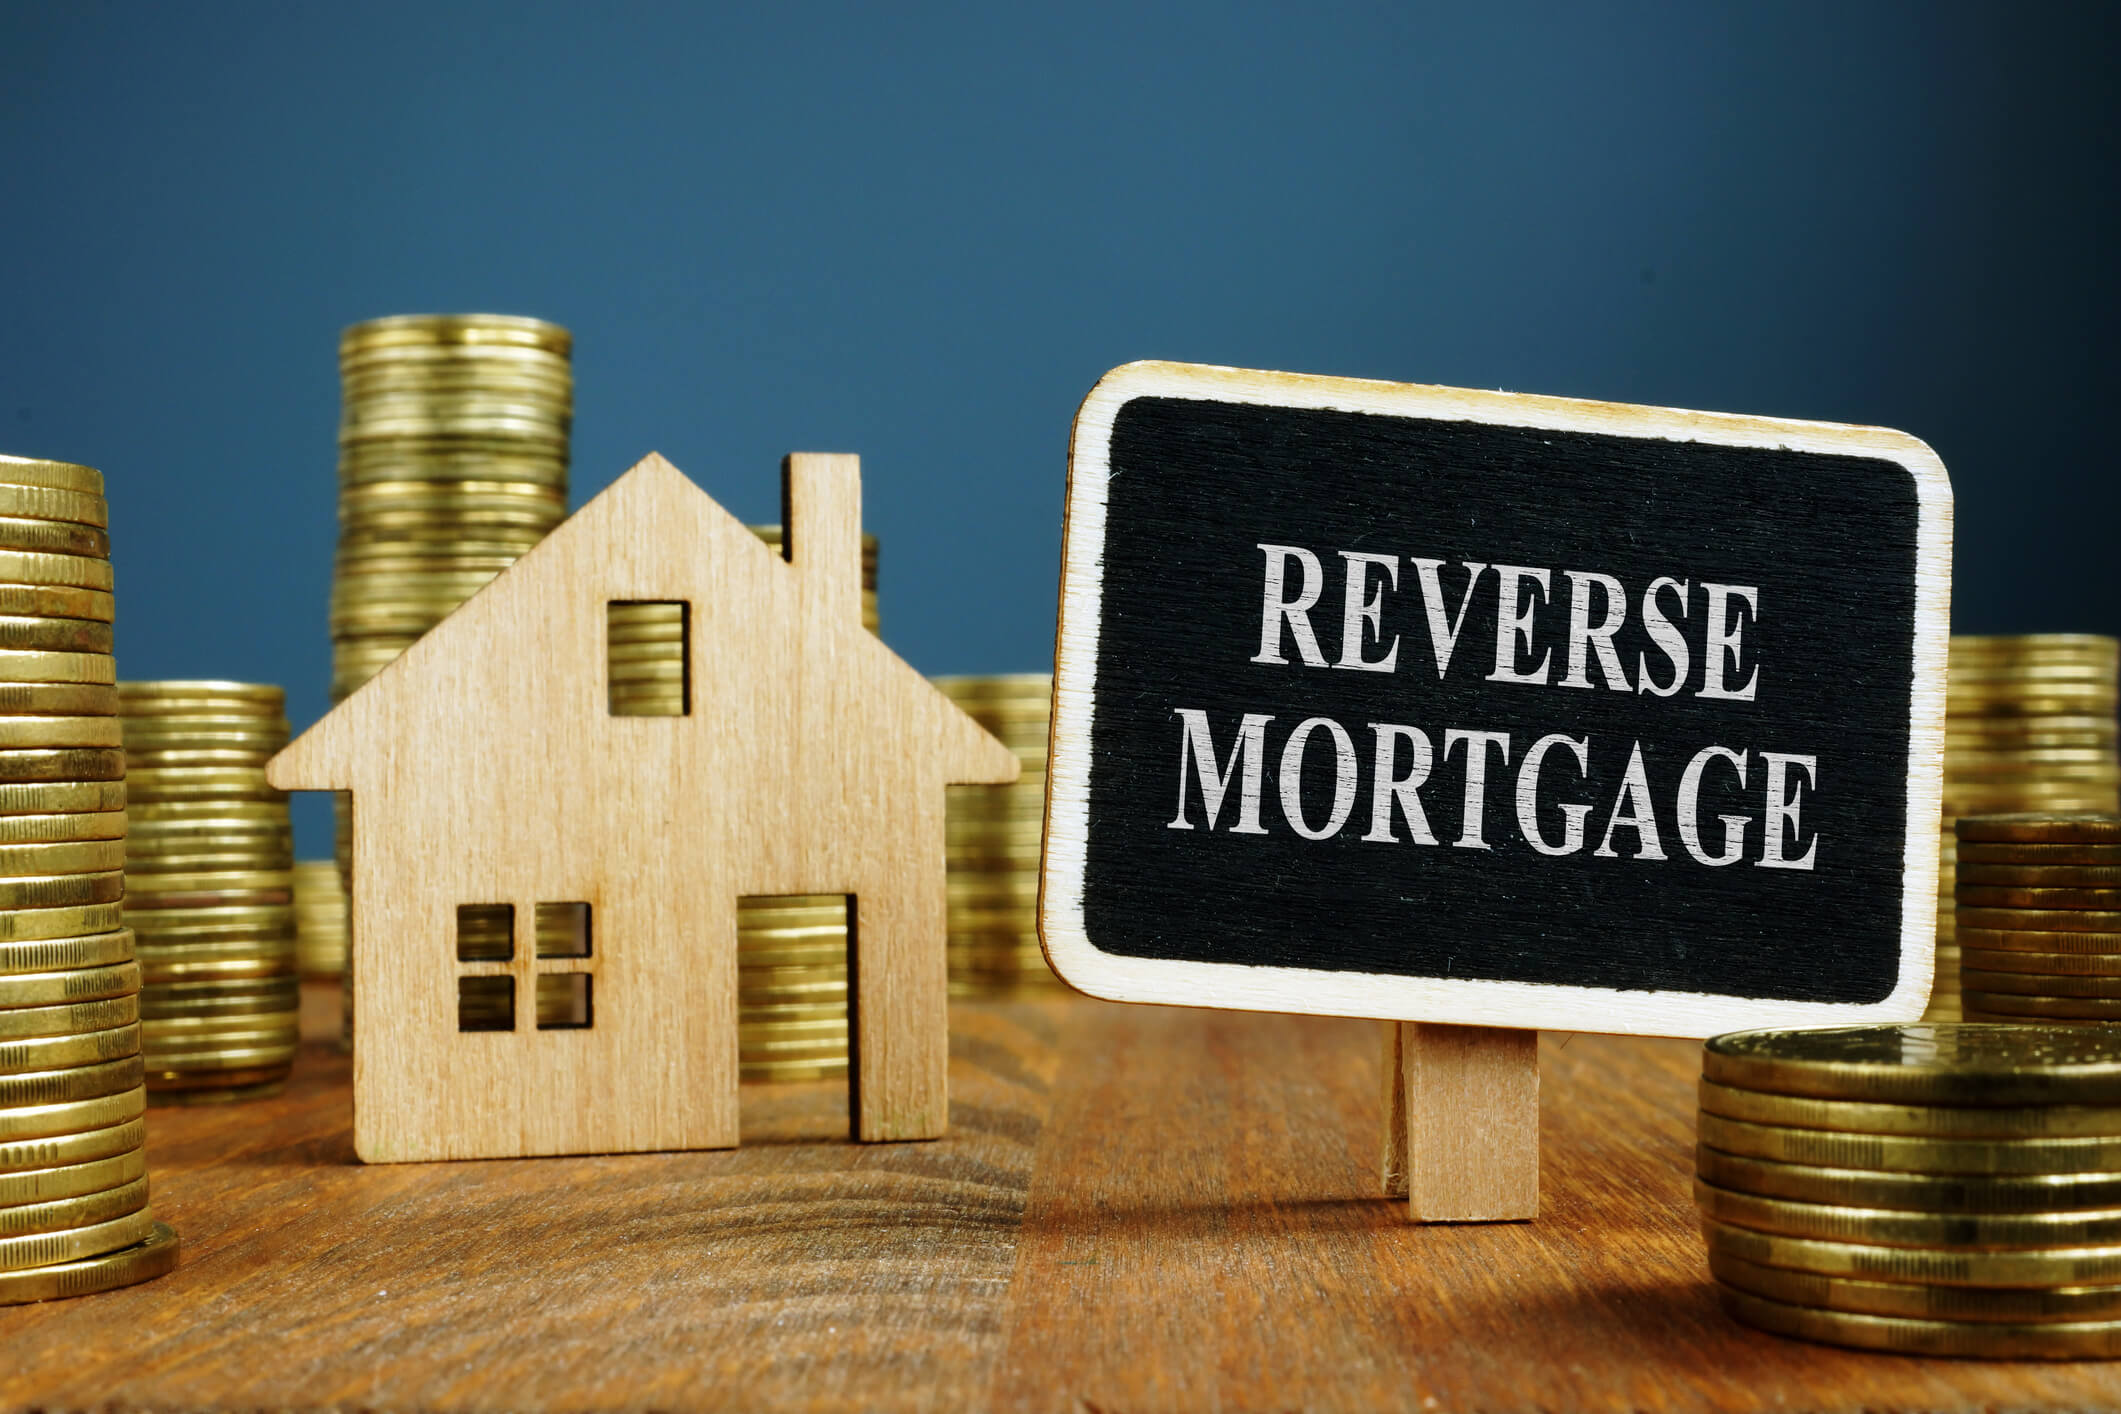 Reverse Mortgage - Complete Controller